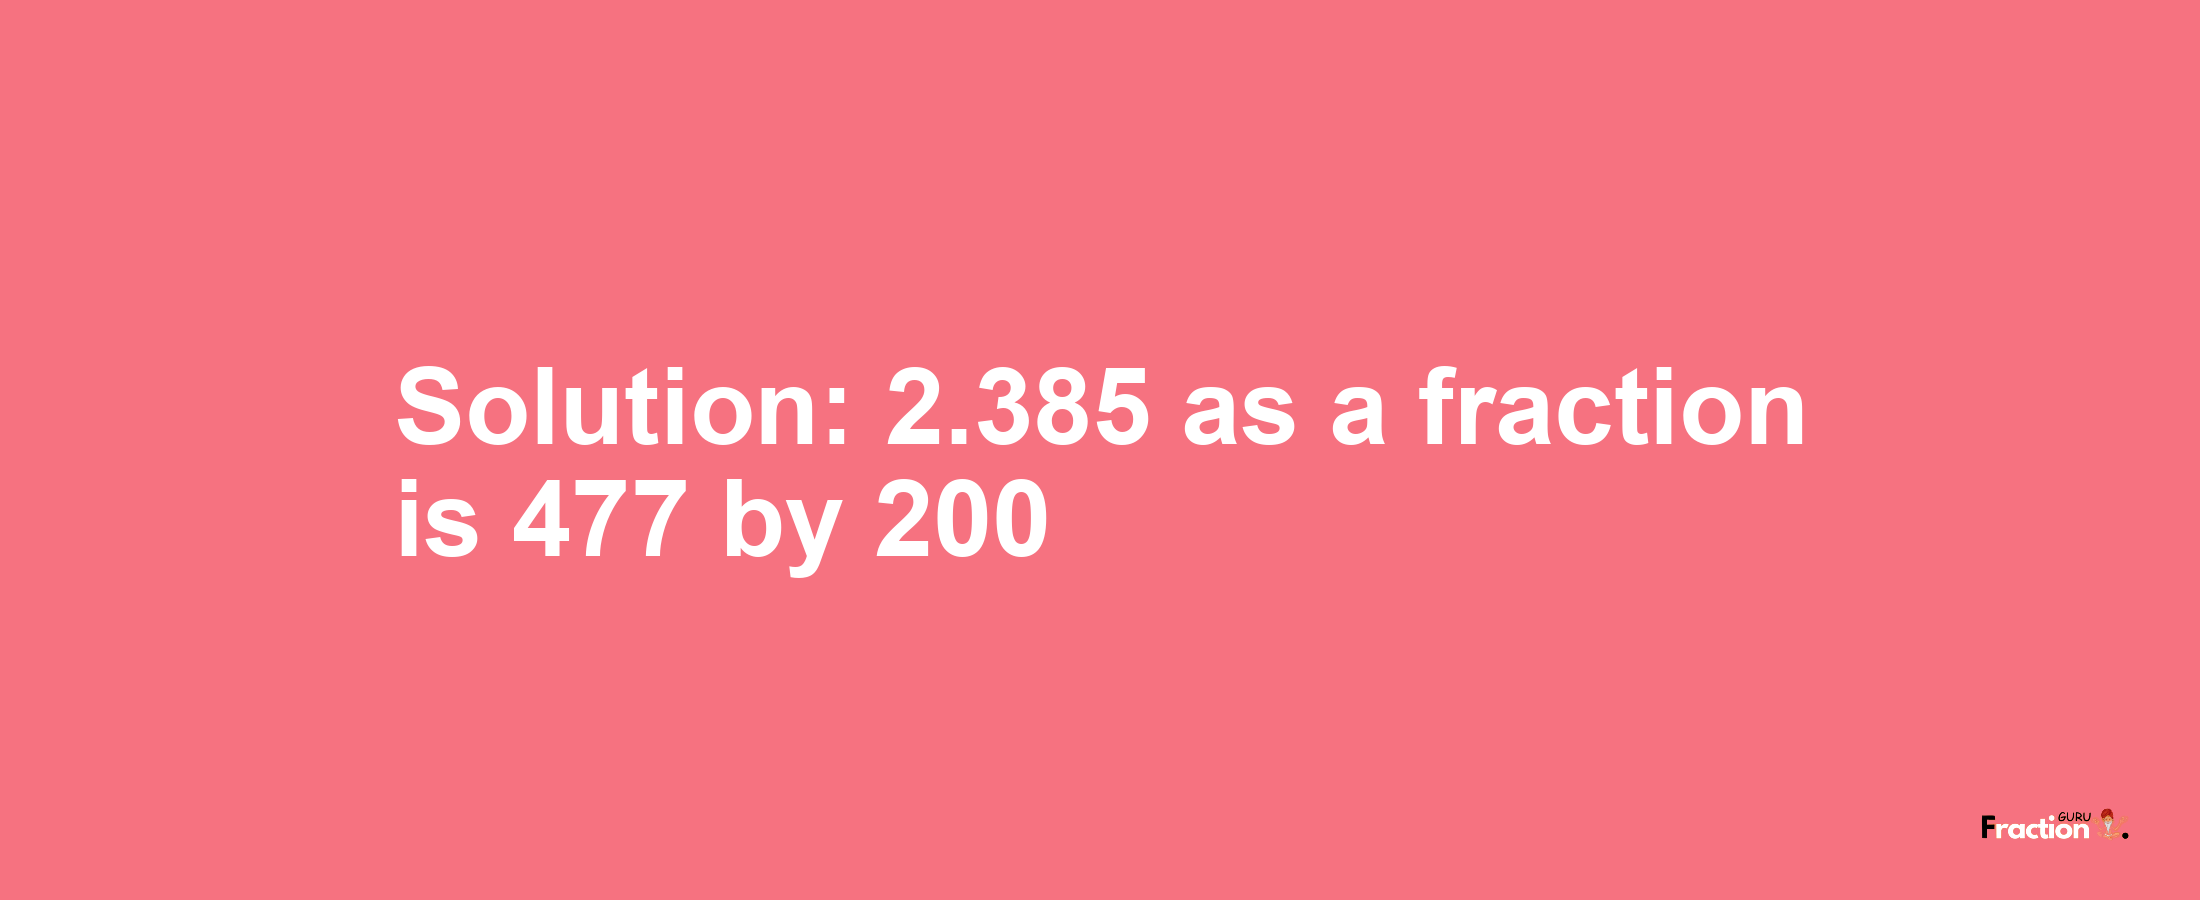 Solution:2.385 as a fraction is 477/200